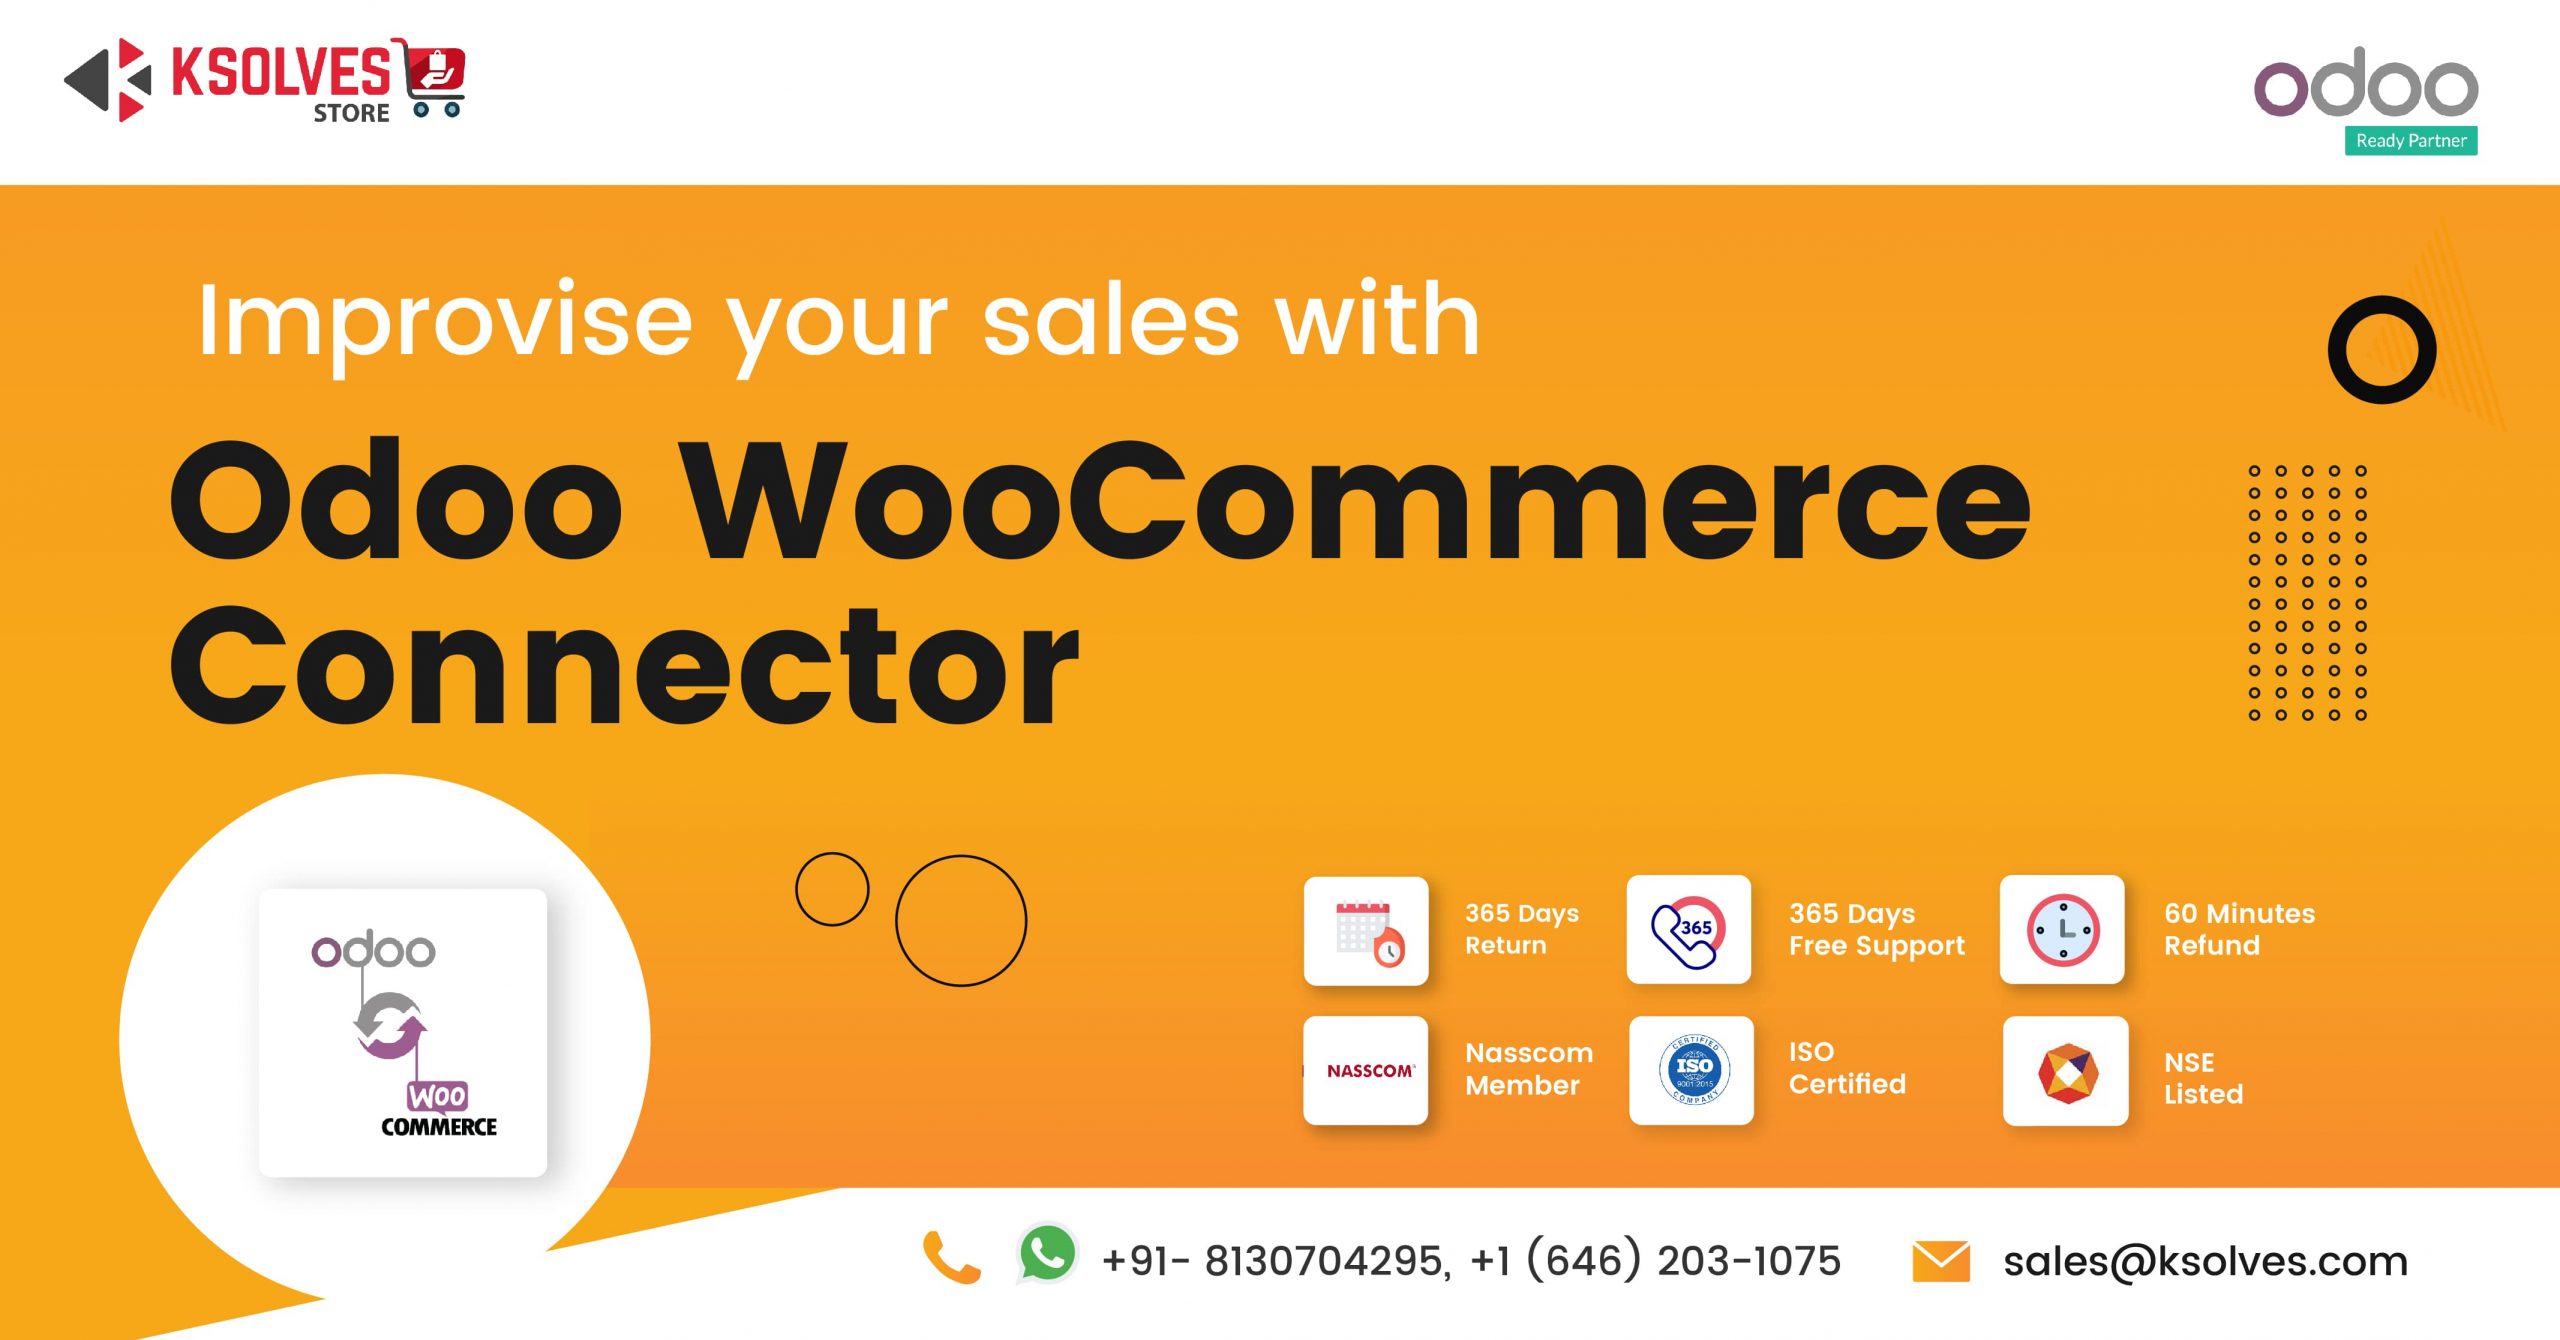 Improvise your sales with Odoo WooCommerce Connector